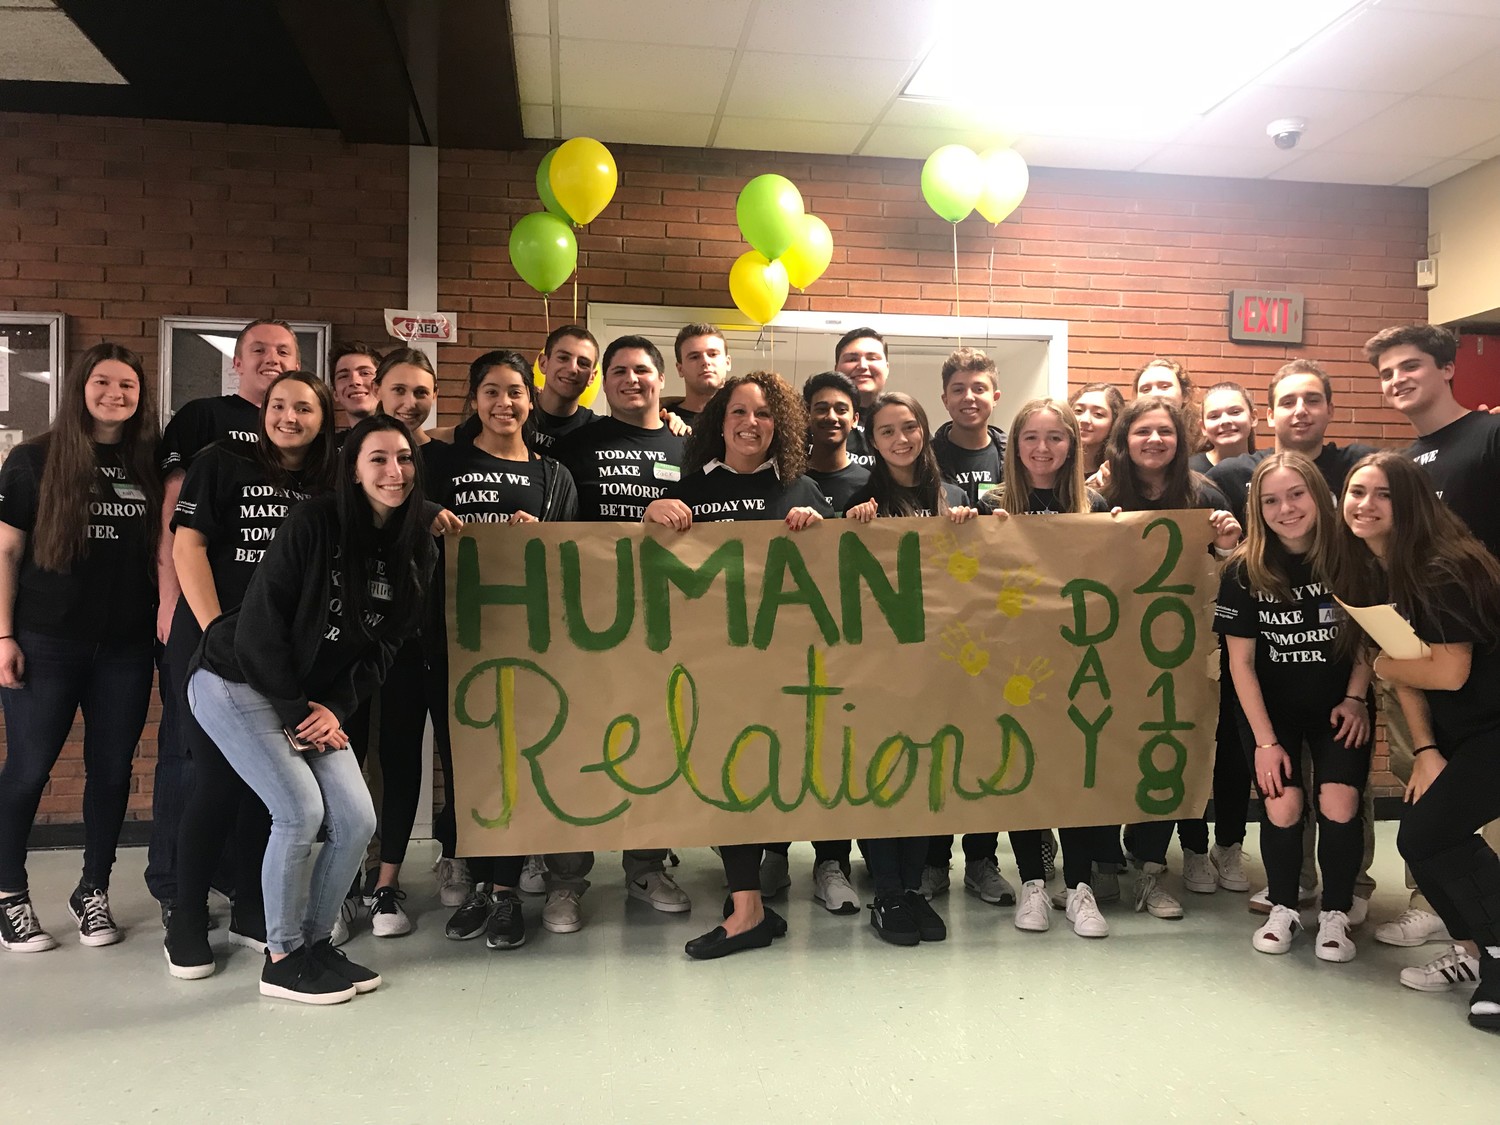 The Lynbrook Student Government Association organized the annual Human Relations Day event on Feb. 15.